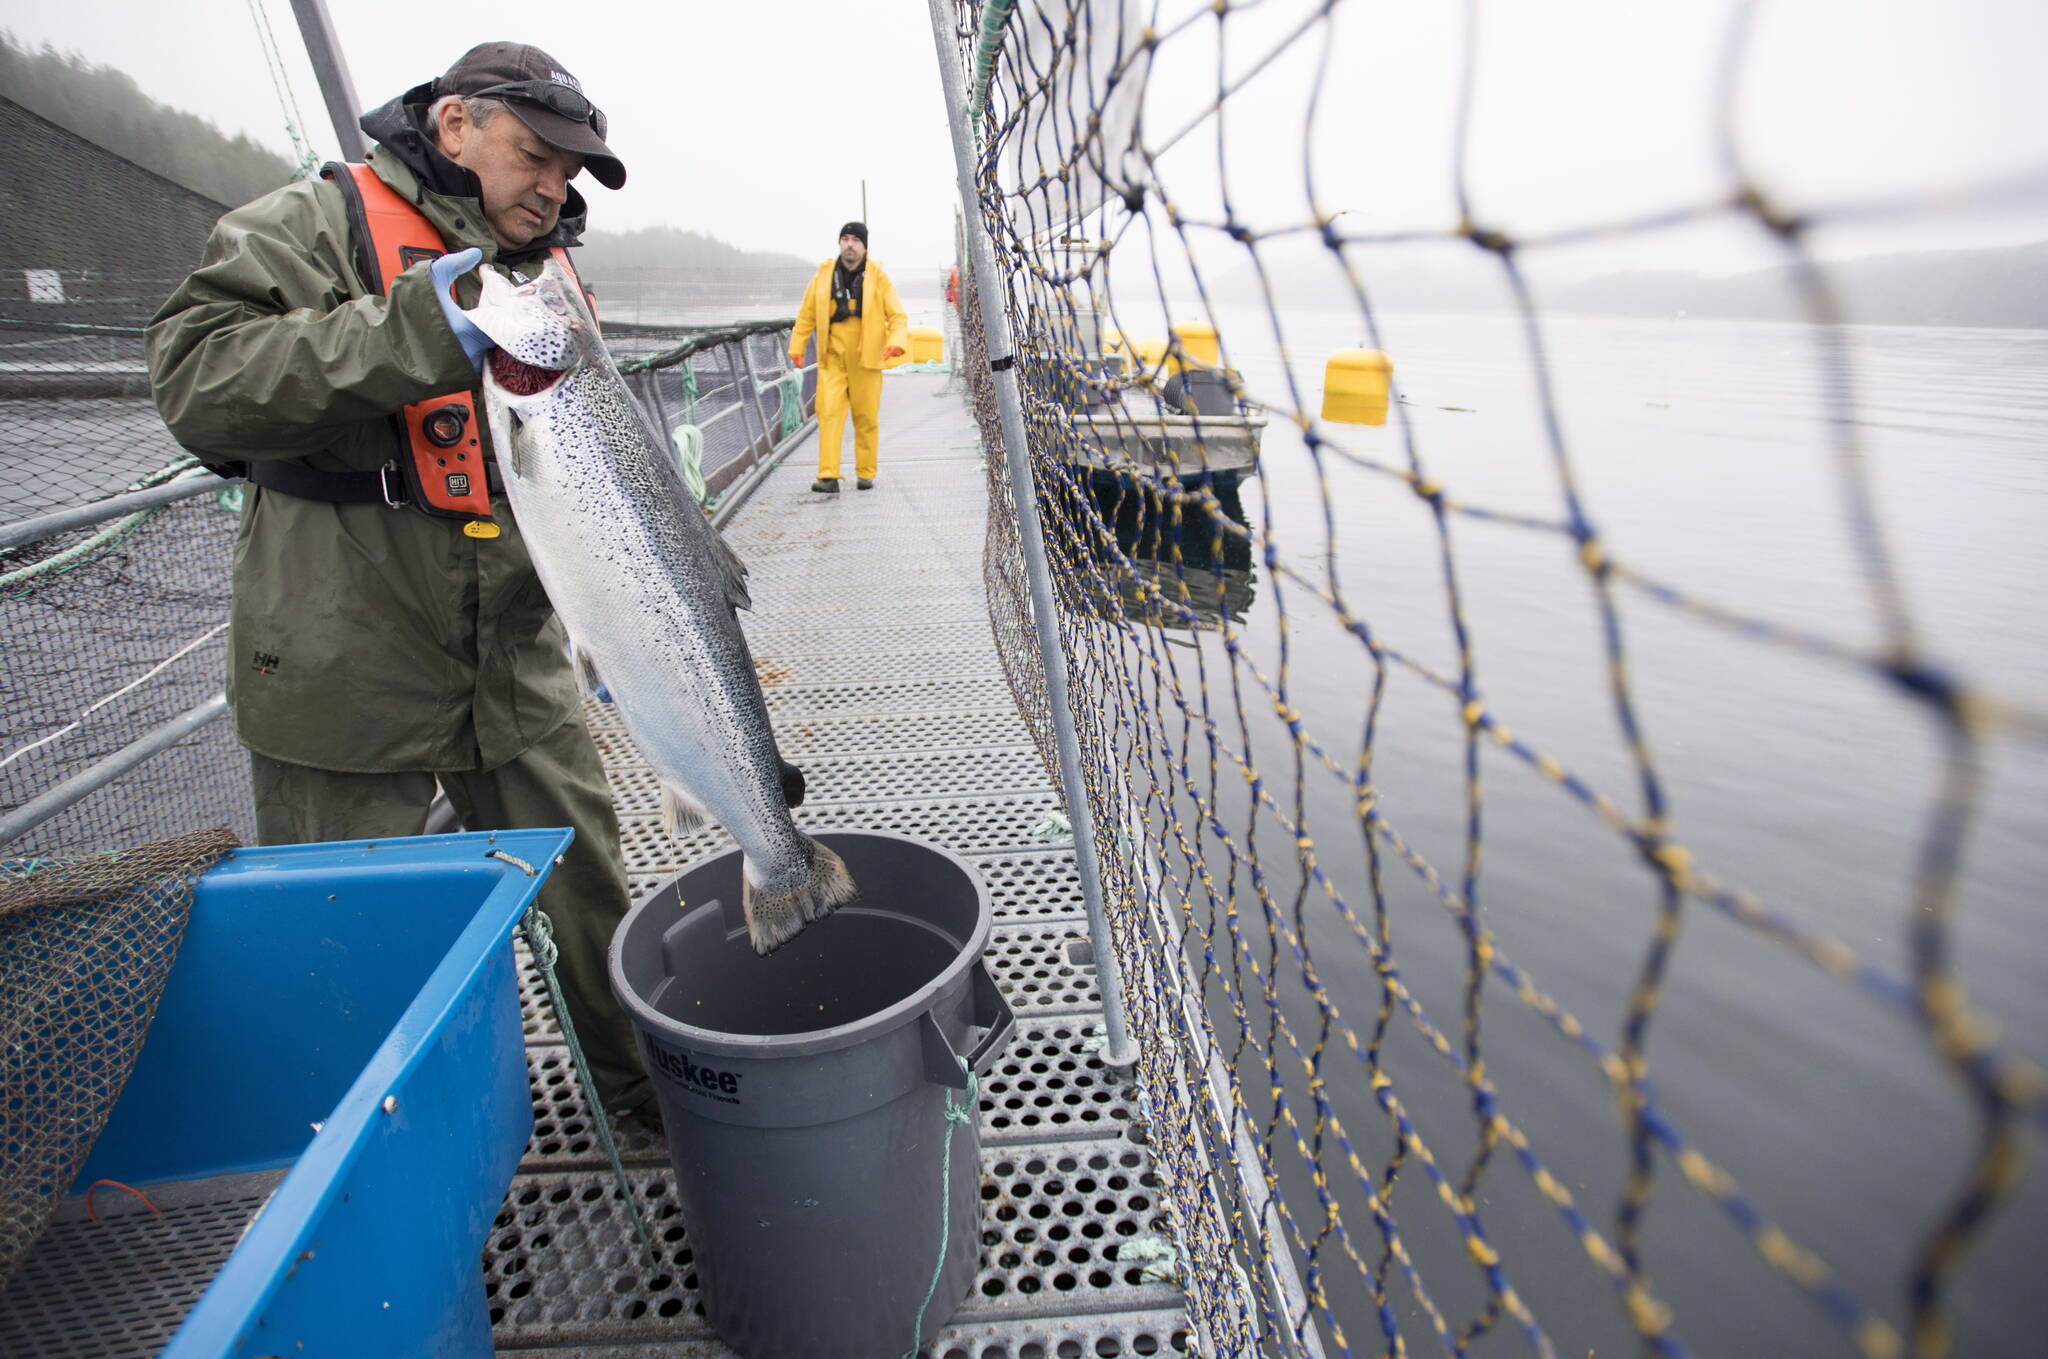 Aquatic science biologist Howie Manchester picks a salmon to collect samples from during a Department of Fisheries and Oceans fish health audit at the Okisollo fish farm near Campbell River, B.C. Wednesday, Oct. 31, 2018. THE CANADIAN PRESS /Jonathan Hayward